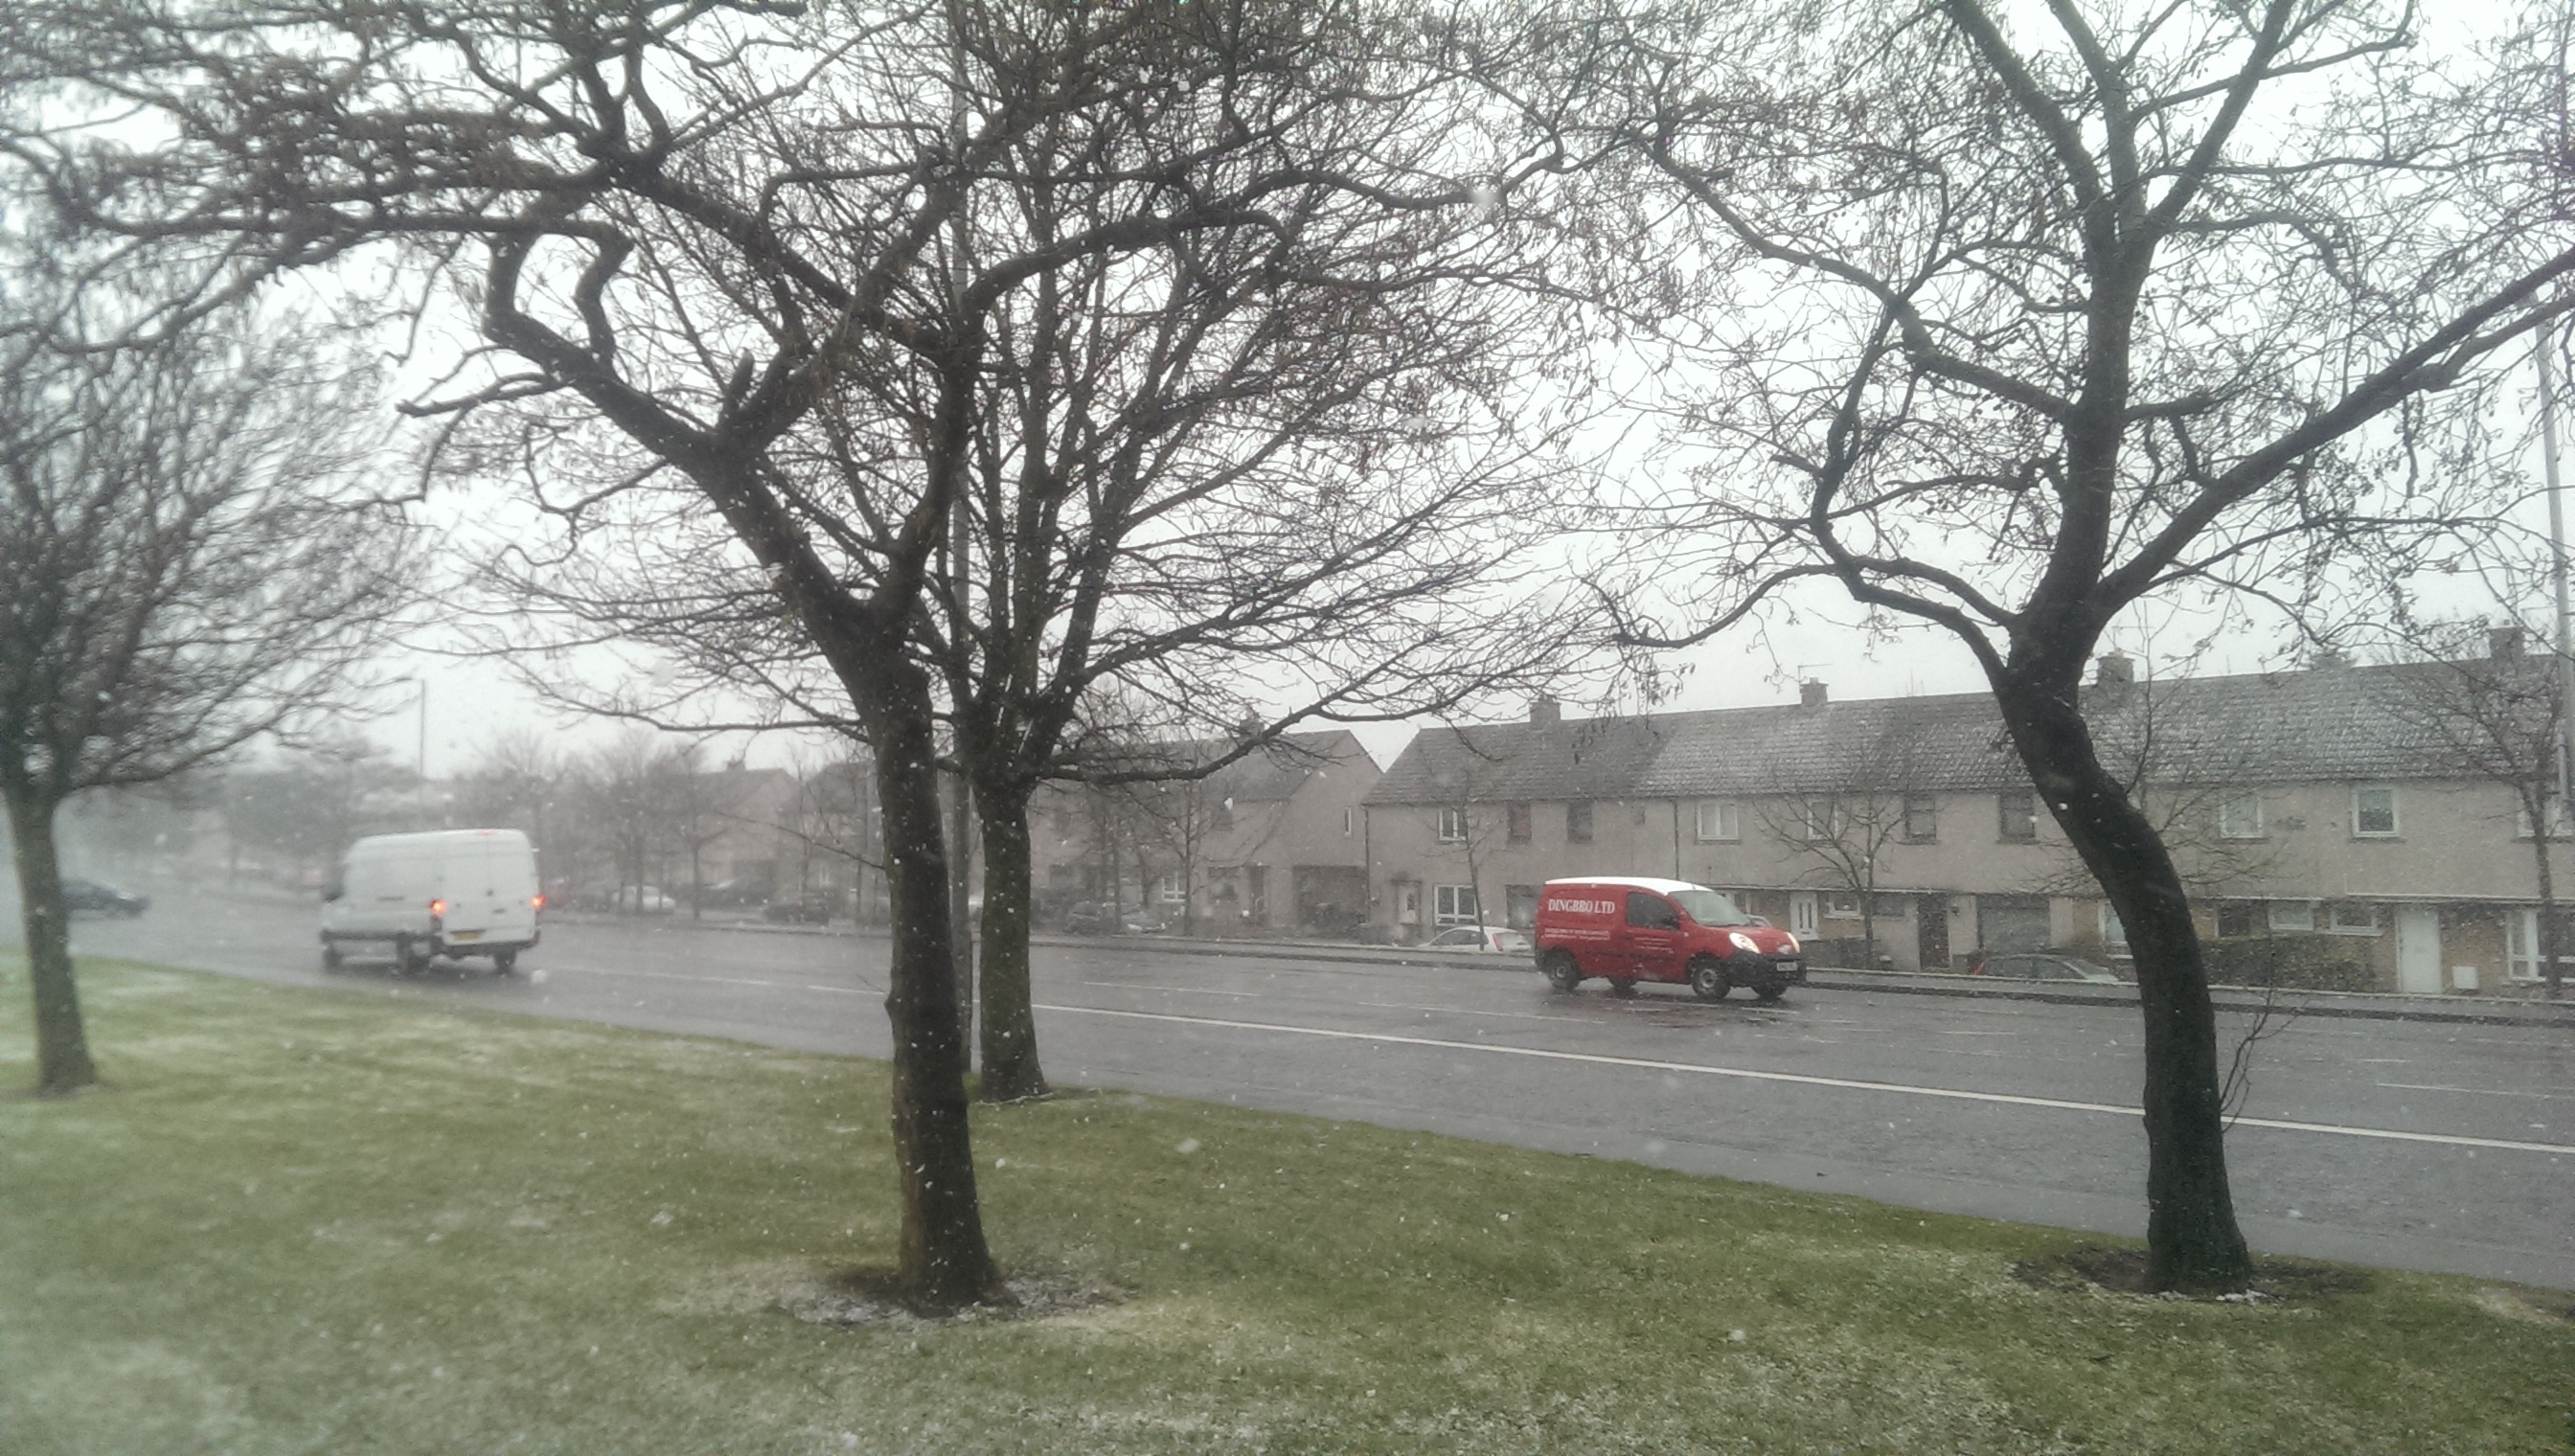 Snow in Aberdeen this afternoon